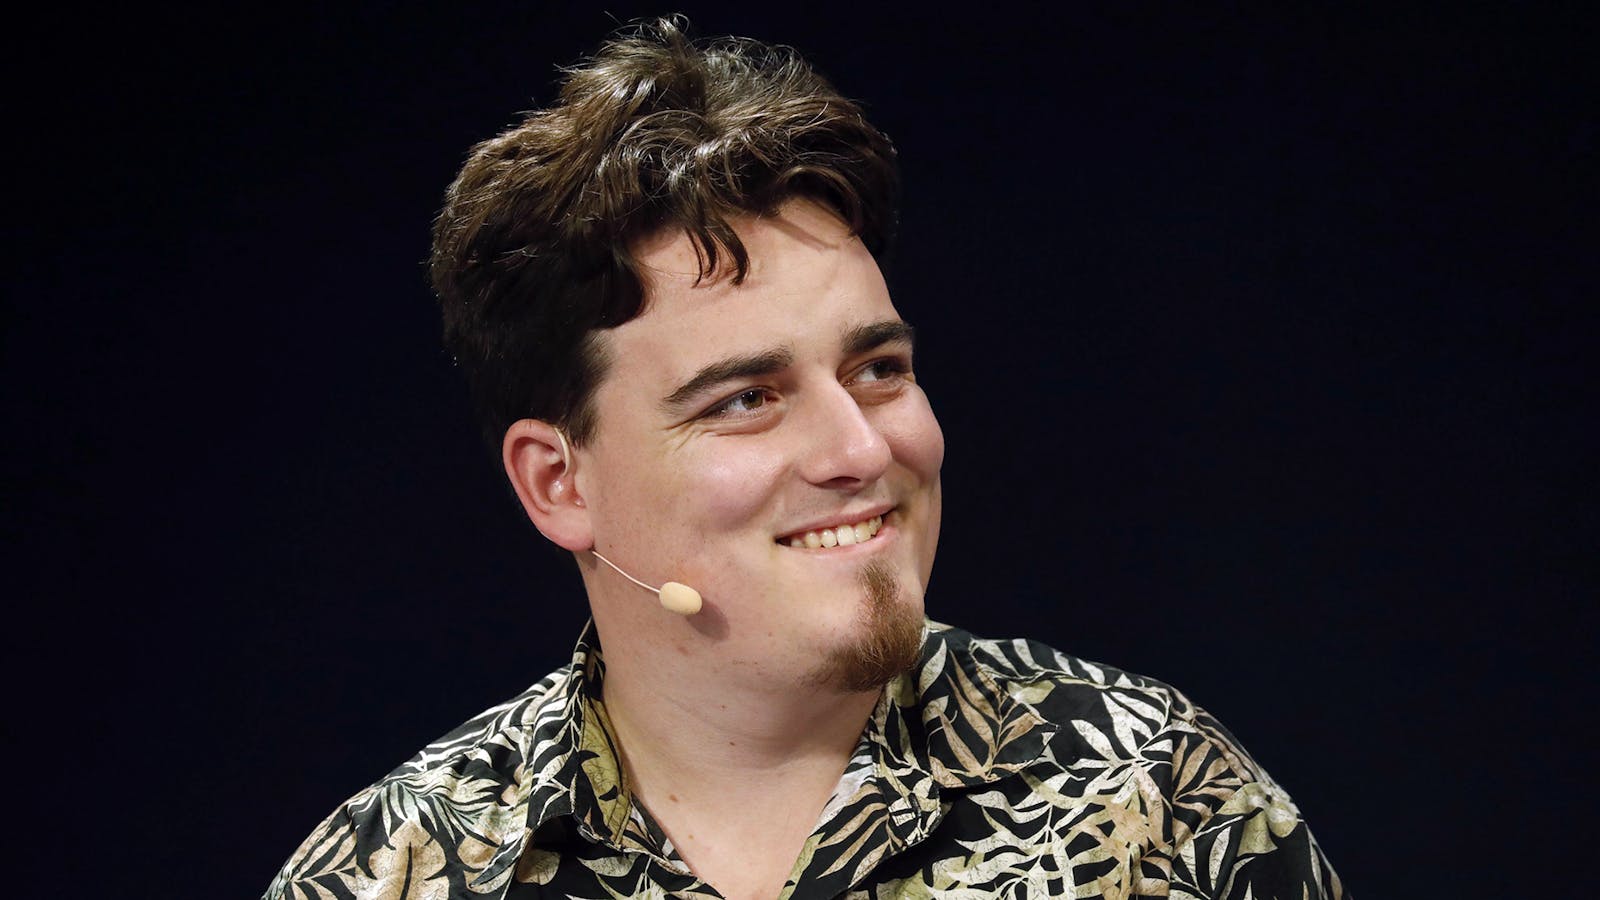 Anduril co-founder Palmer Luckey. Photo by Bloomberg.